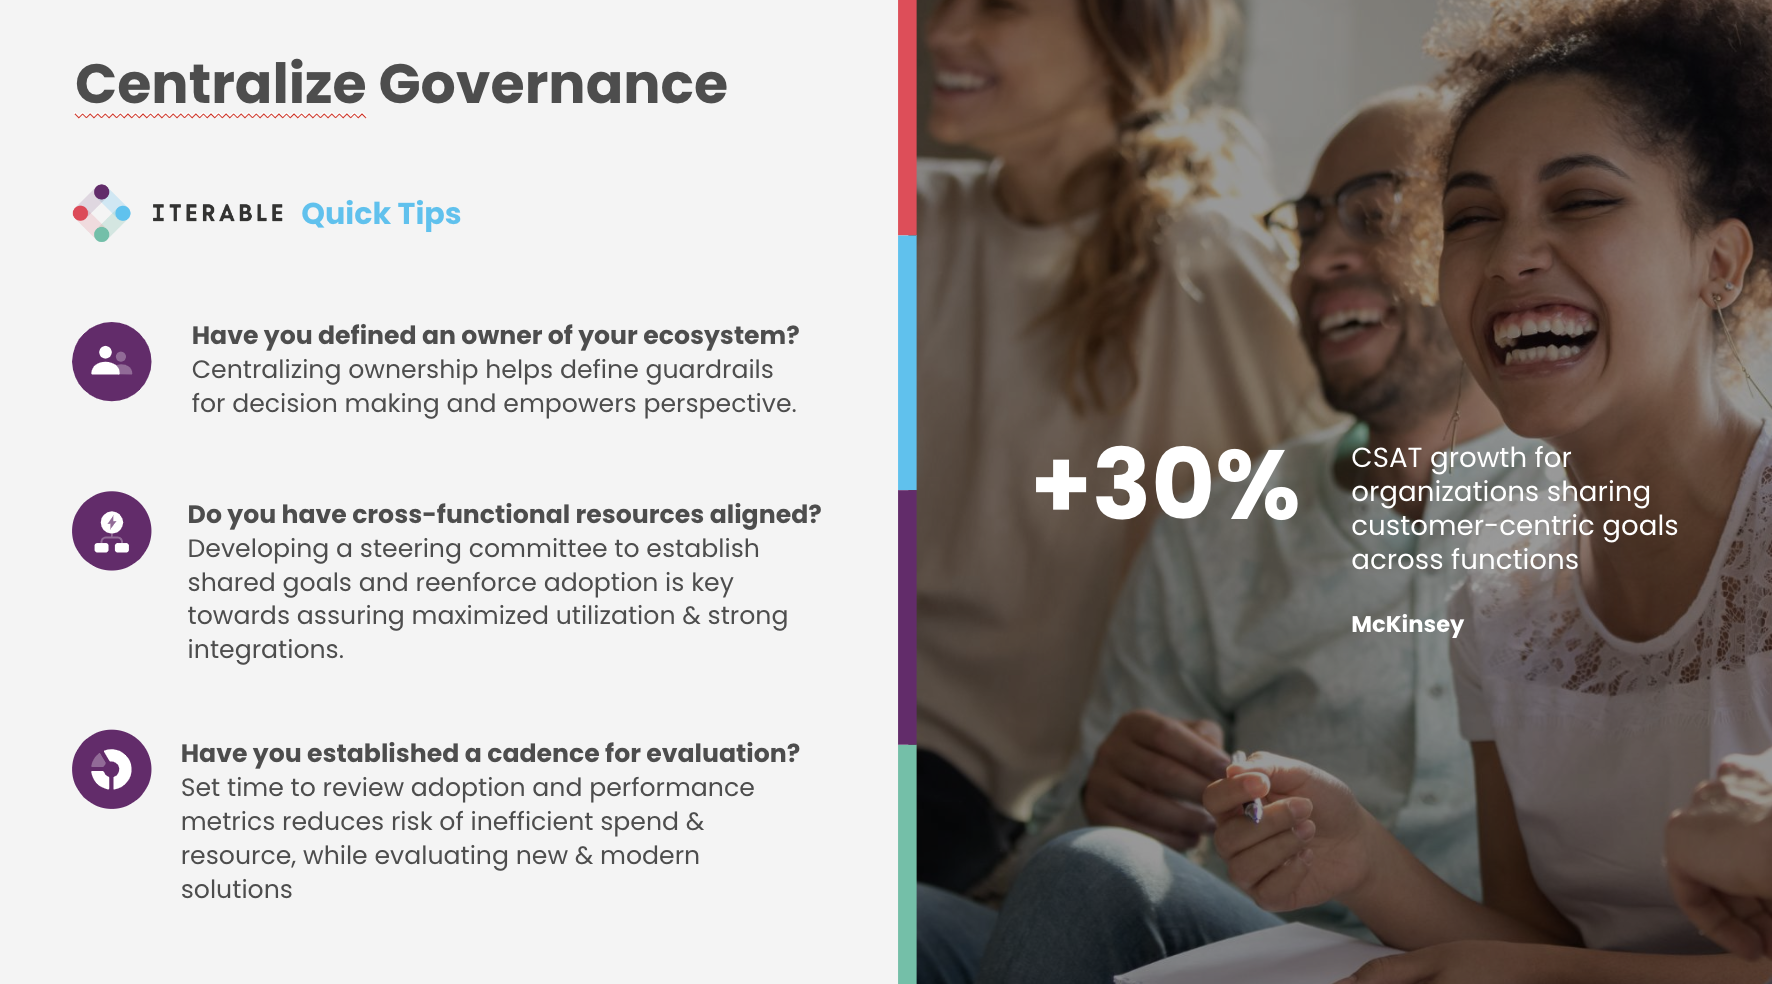 Slide from a deck showing some iterable quick tips on centralizing governance.